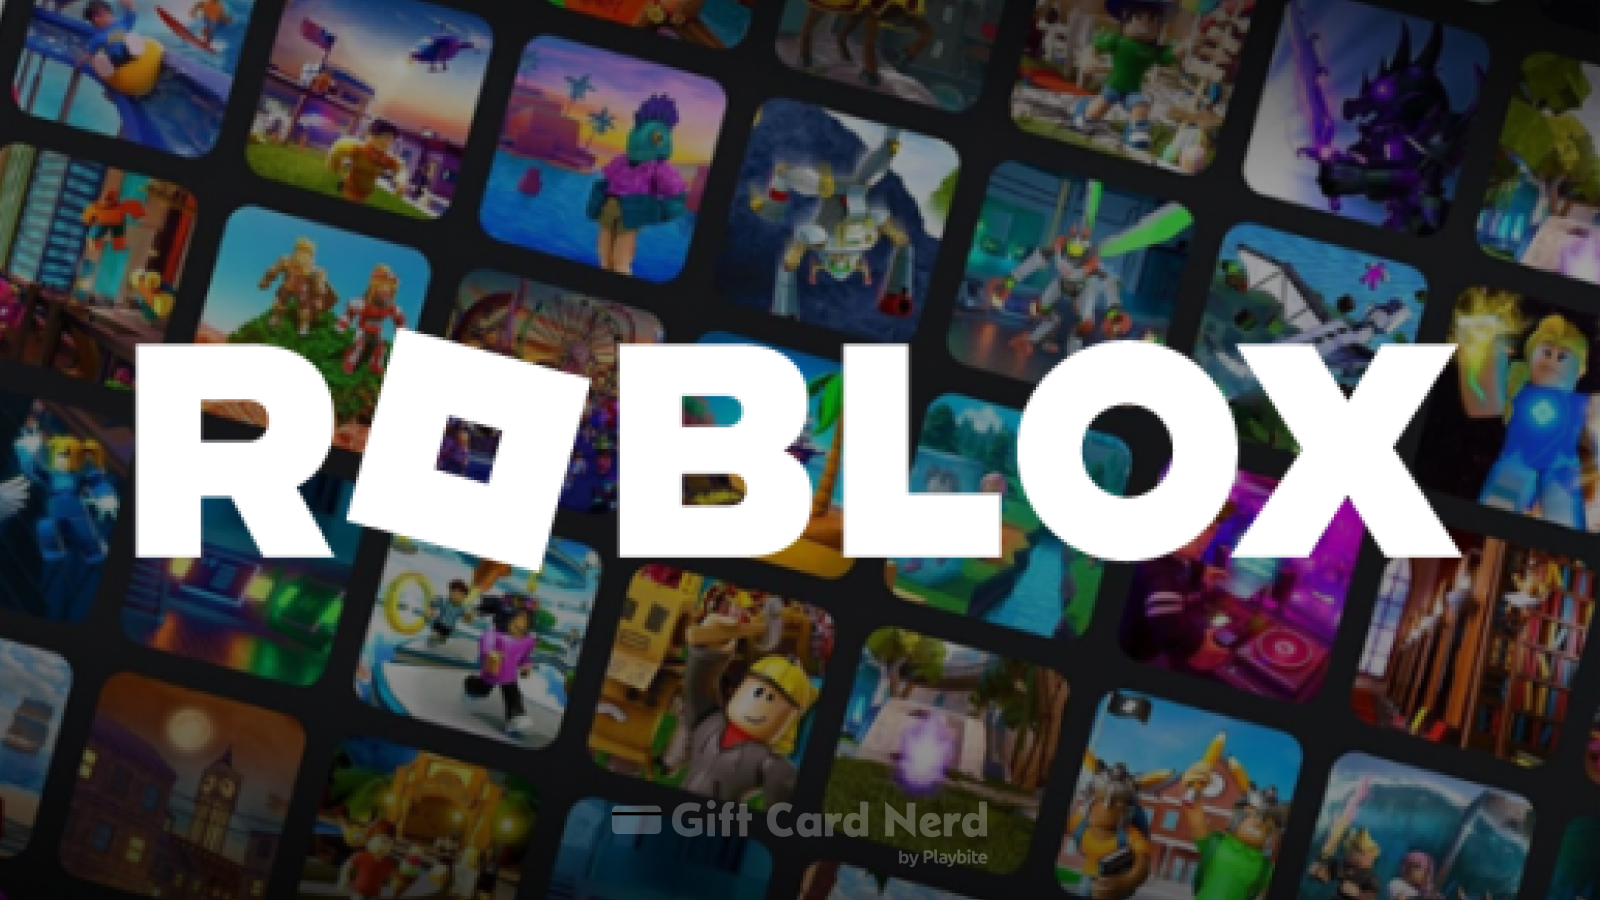 Where to Buy Roblox Gift Cards: Gamestop Edition